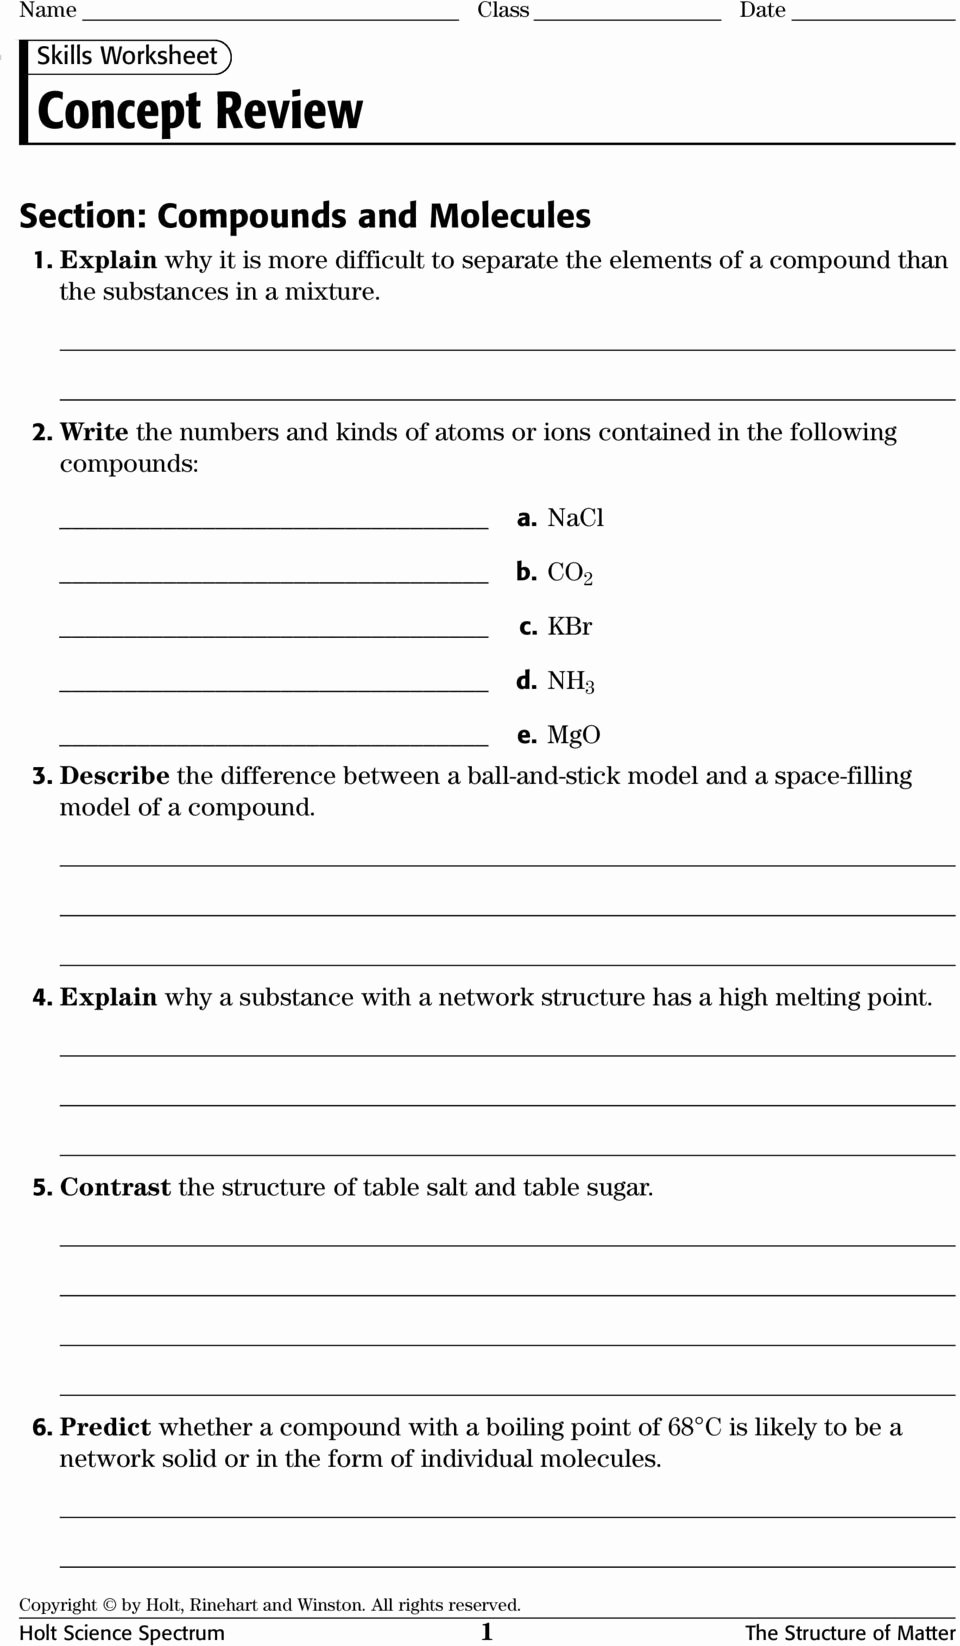 50 Behavior Of Gases Worksheet Chessmuseum Template Library